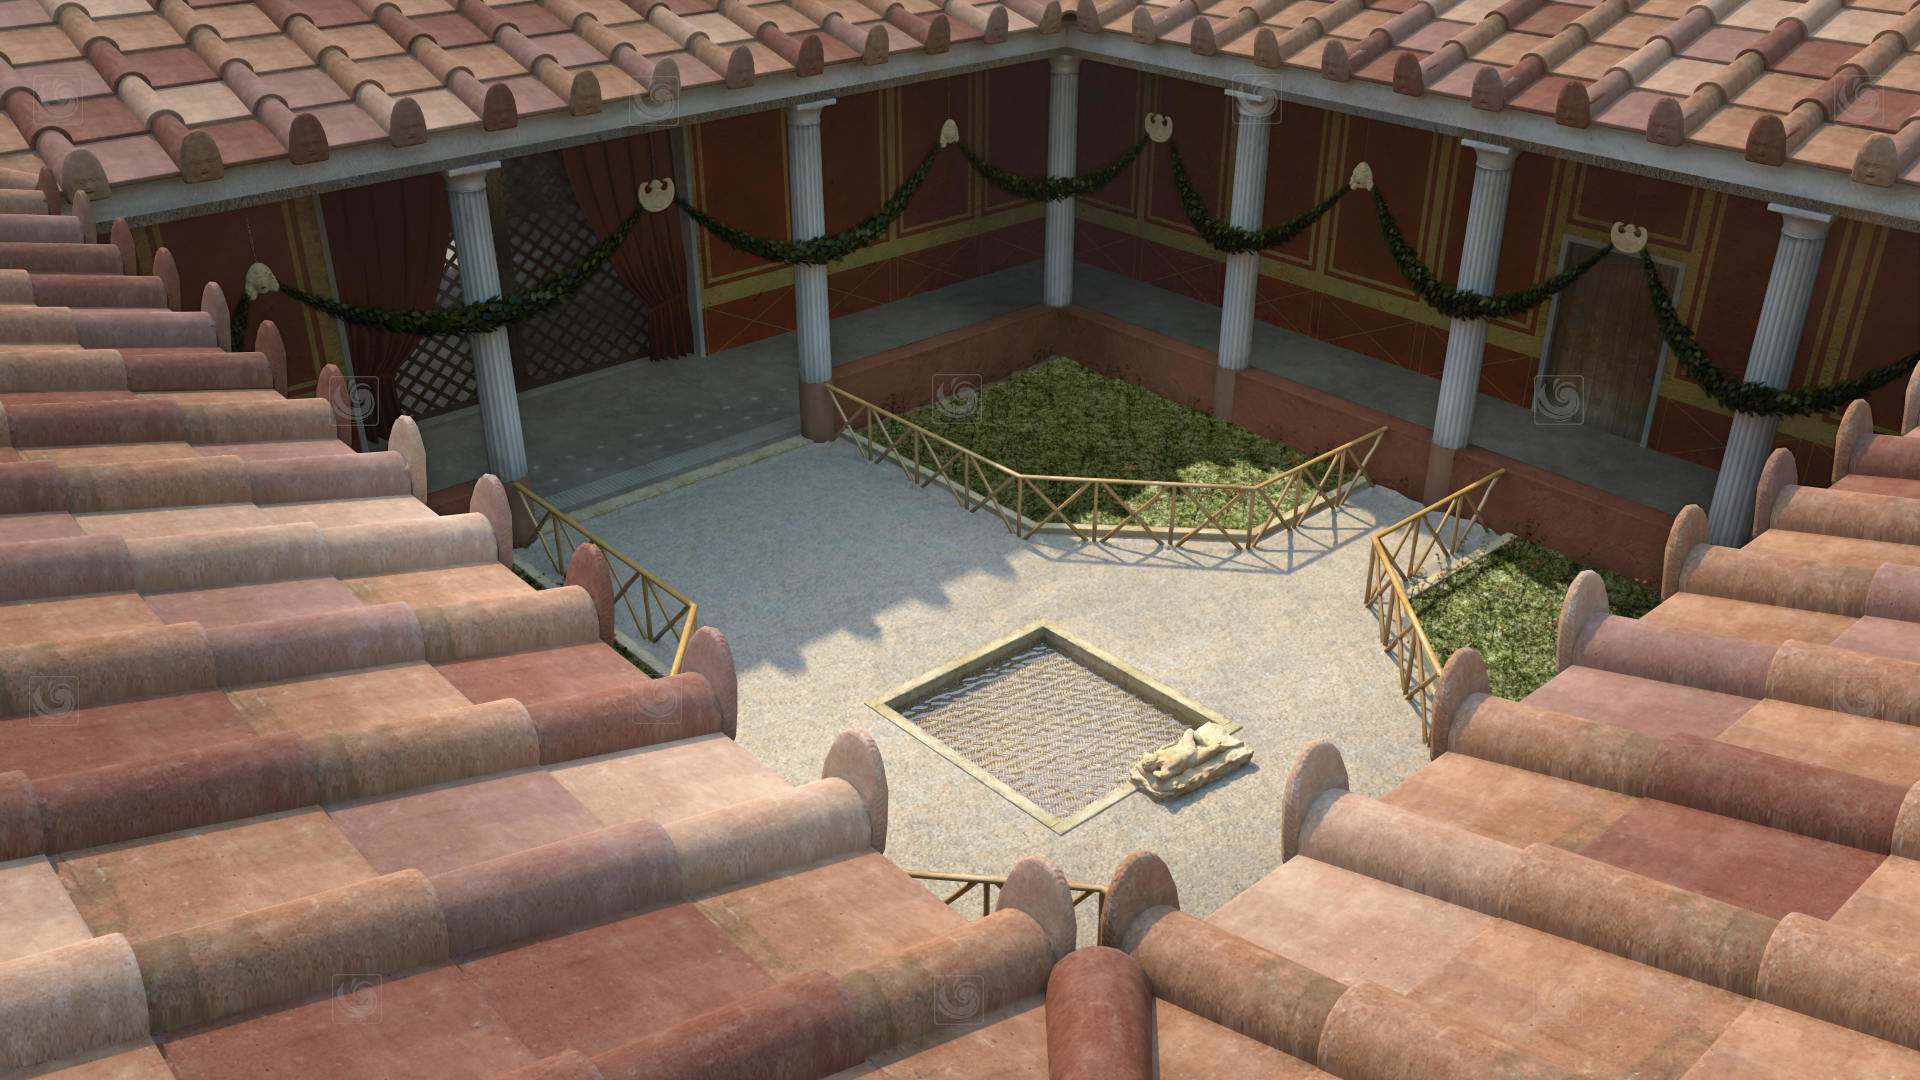 3D animation frame showing a general view of an ancient Rome courtyard